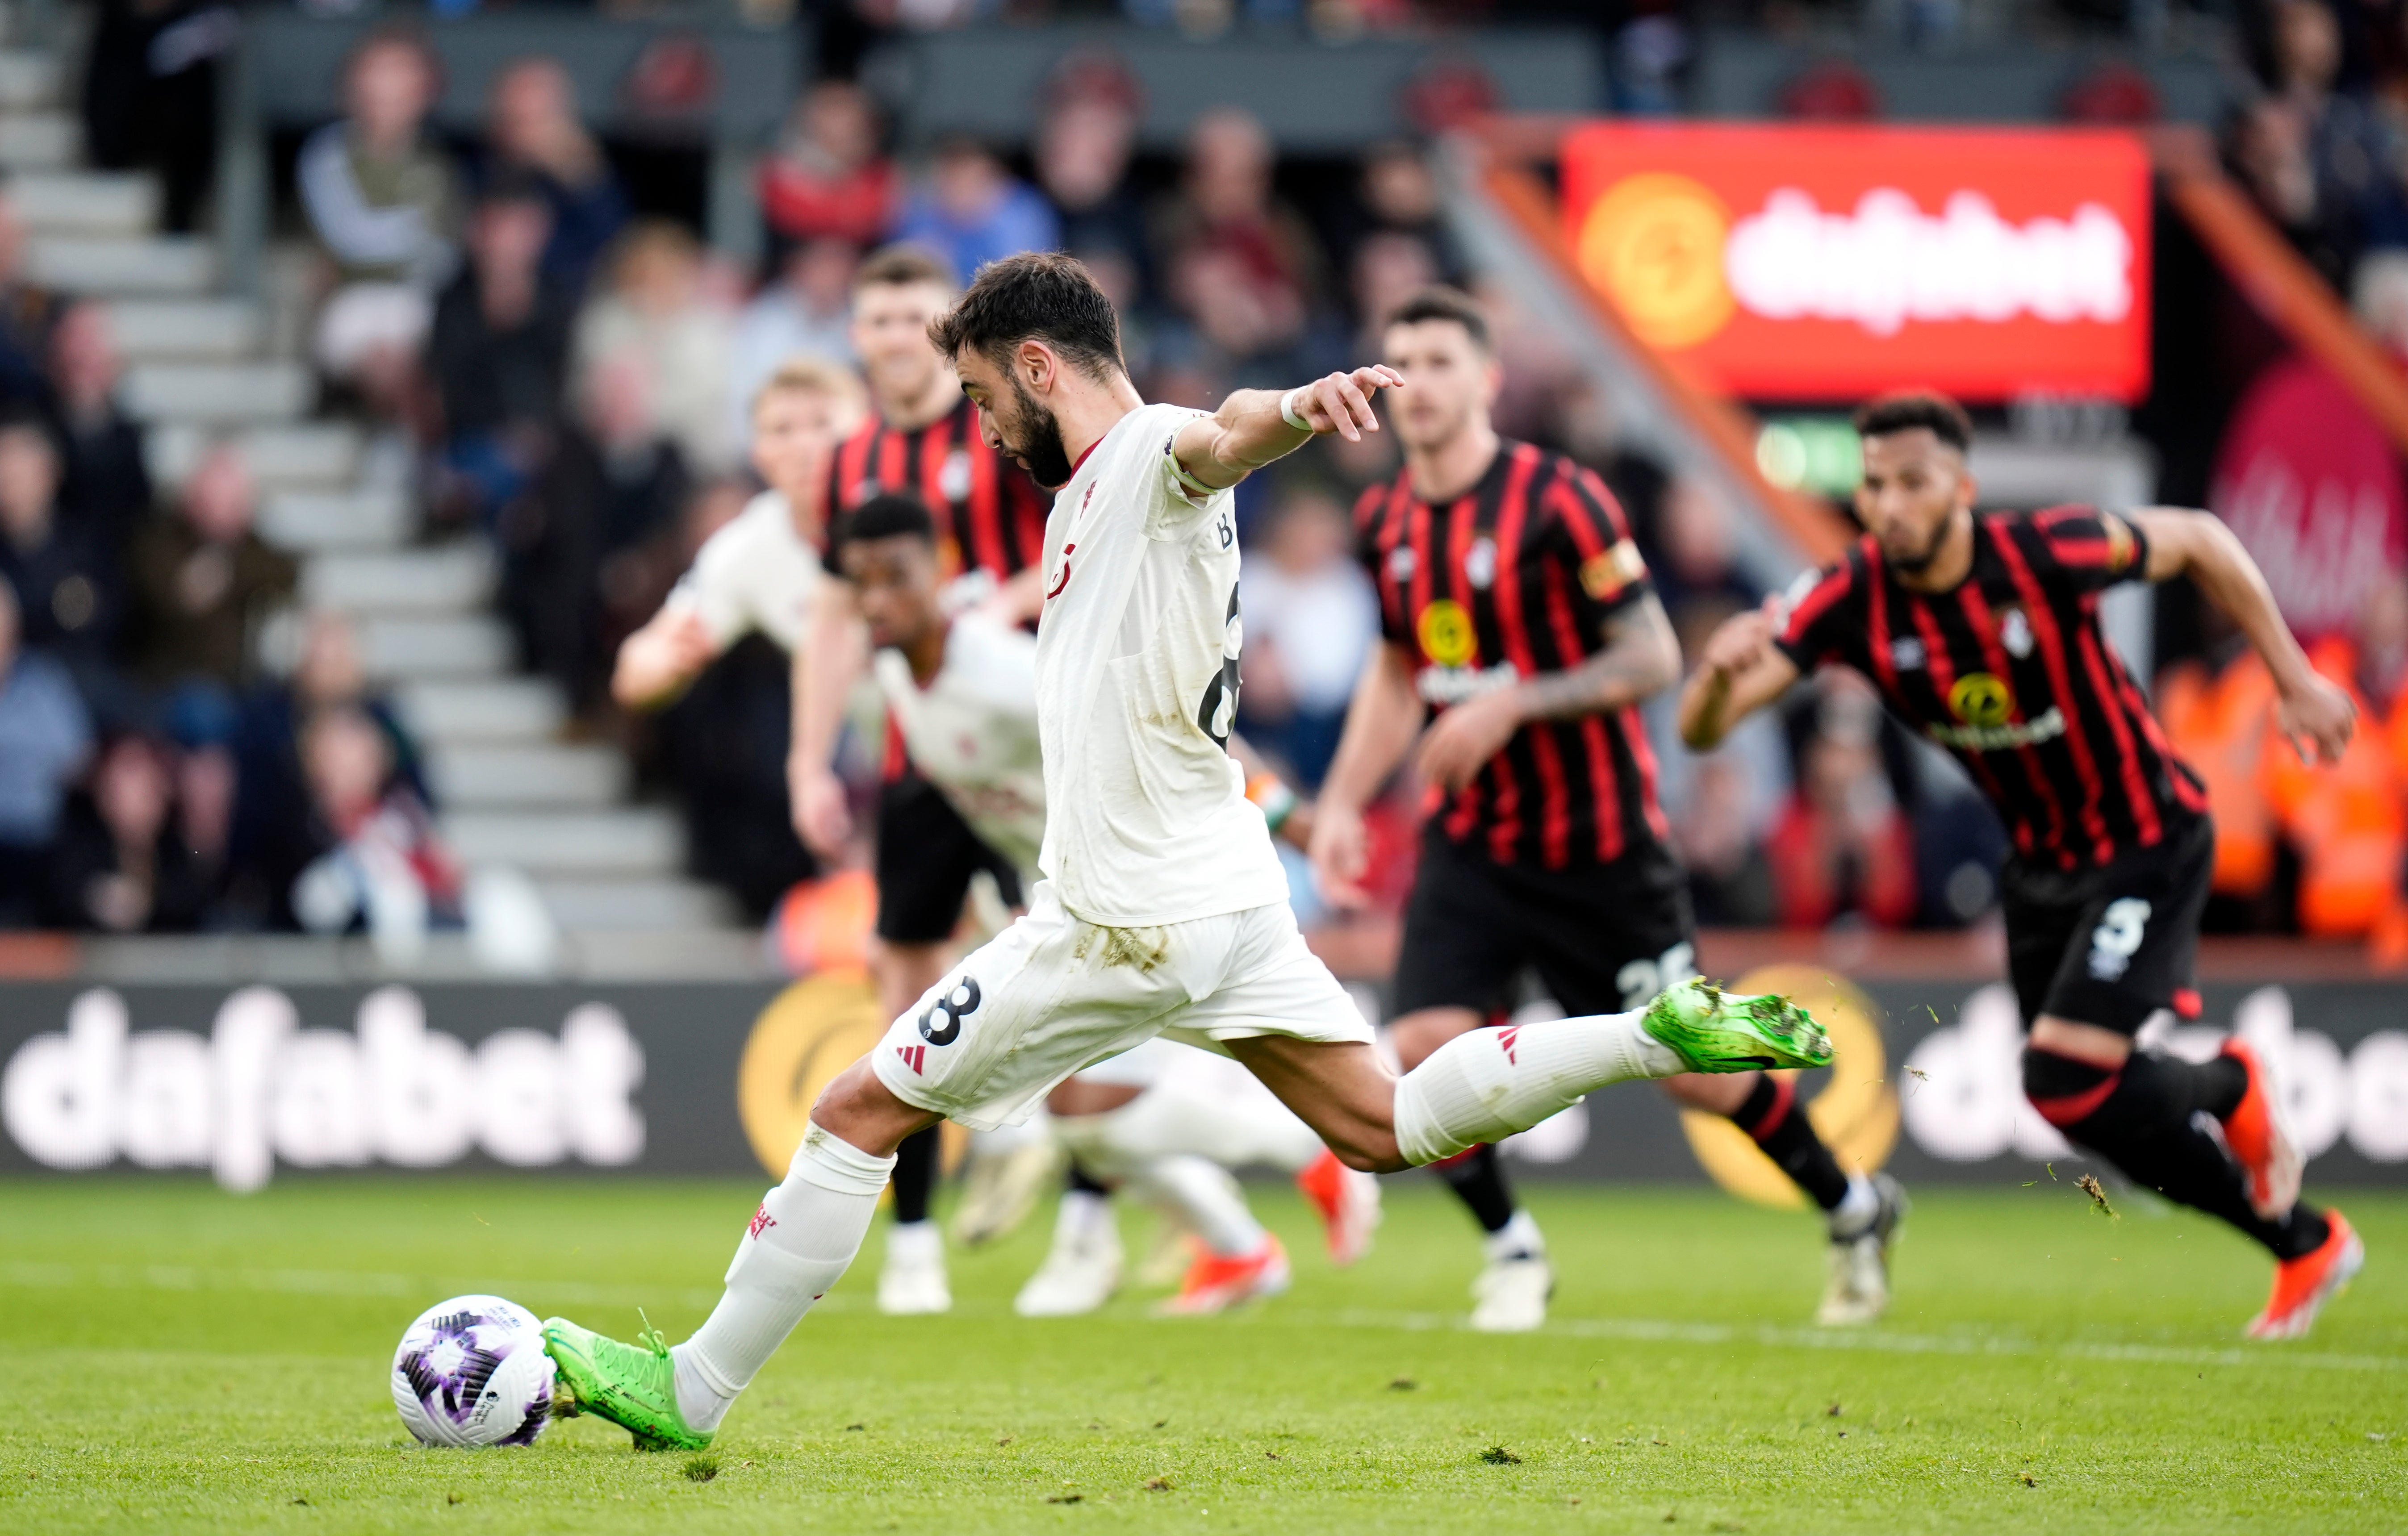 Bournemouth vs Man Utd LIVE: Premier League result and reaction as controversial penalty earns visitors a draw | The Independent